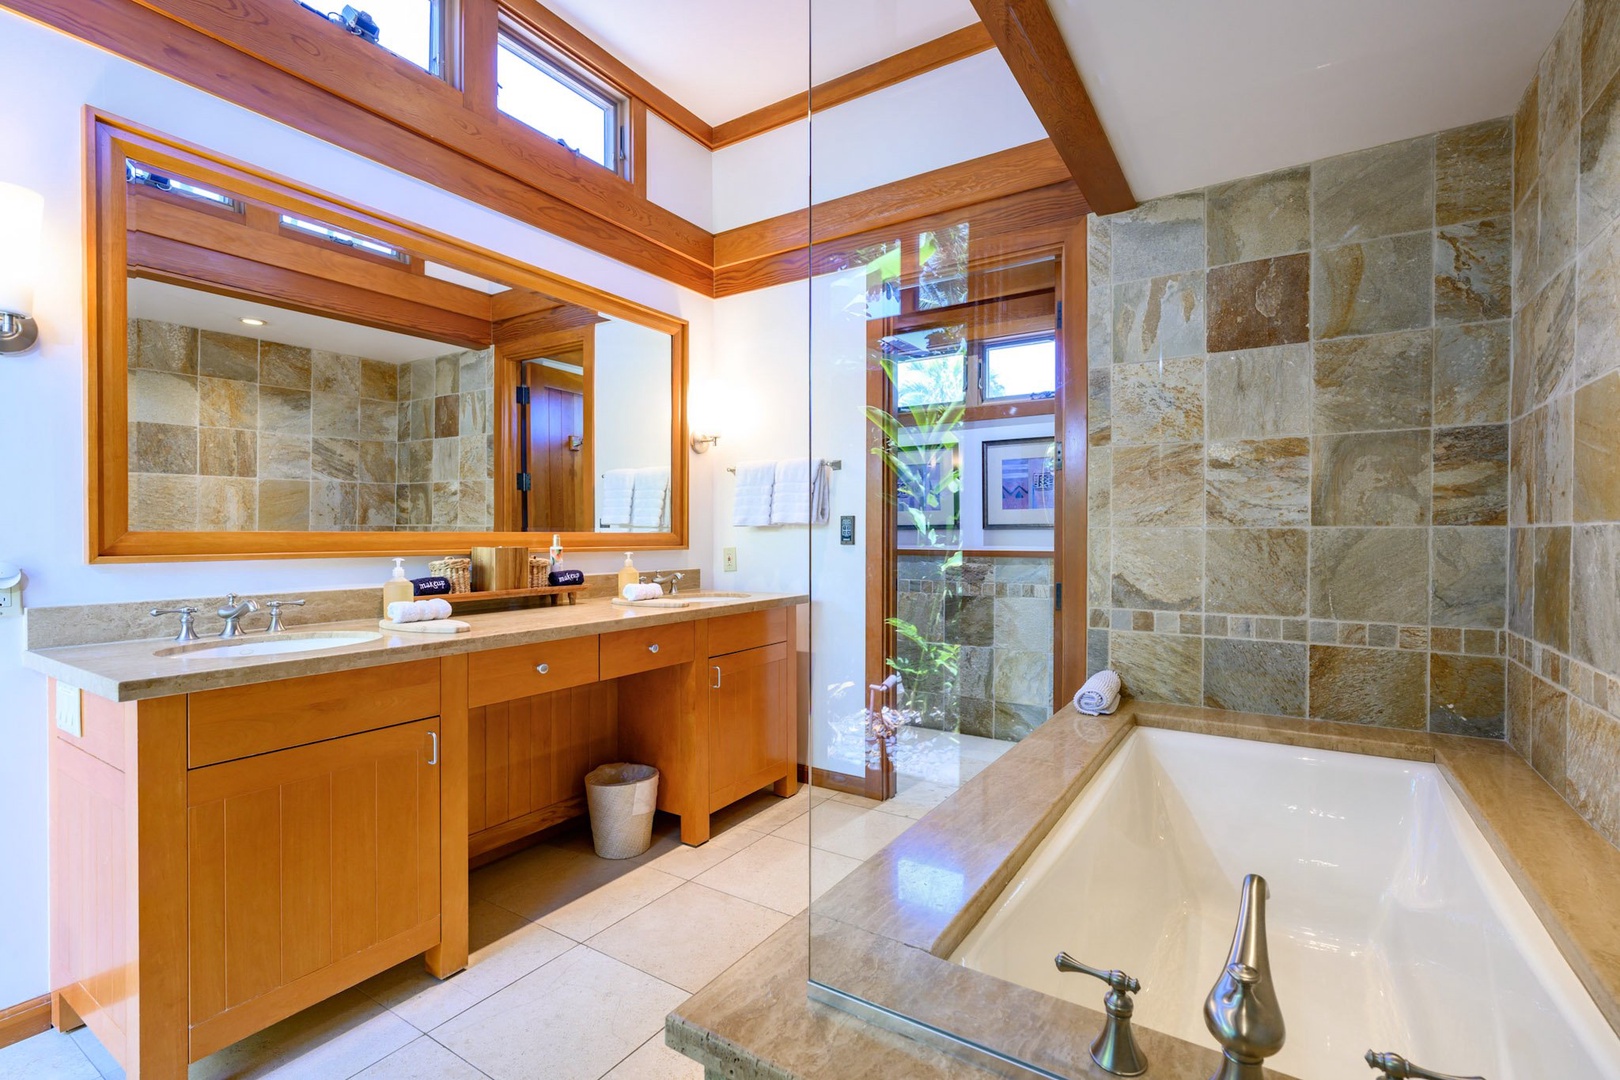 Kamuela Vacation Rentals, 3BD Na Hale 3 at Pauoa Beach Club at Mauna Lani Resort - The ensuite bathroom feature a soaker tub and shower, providing a spa-like experience for all guests.